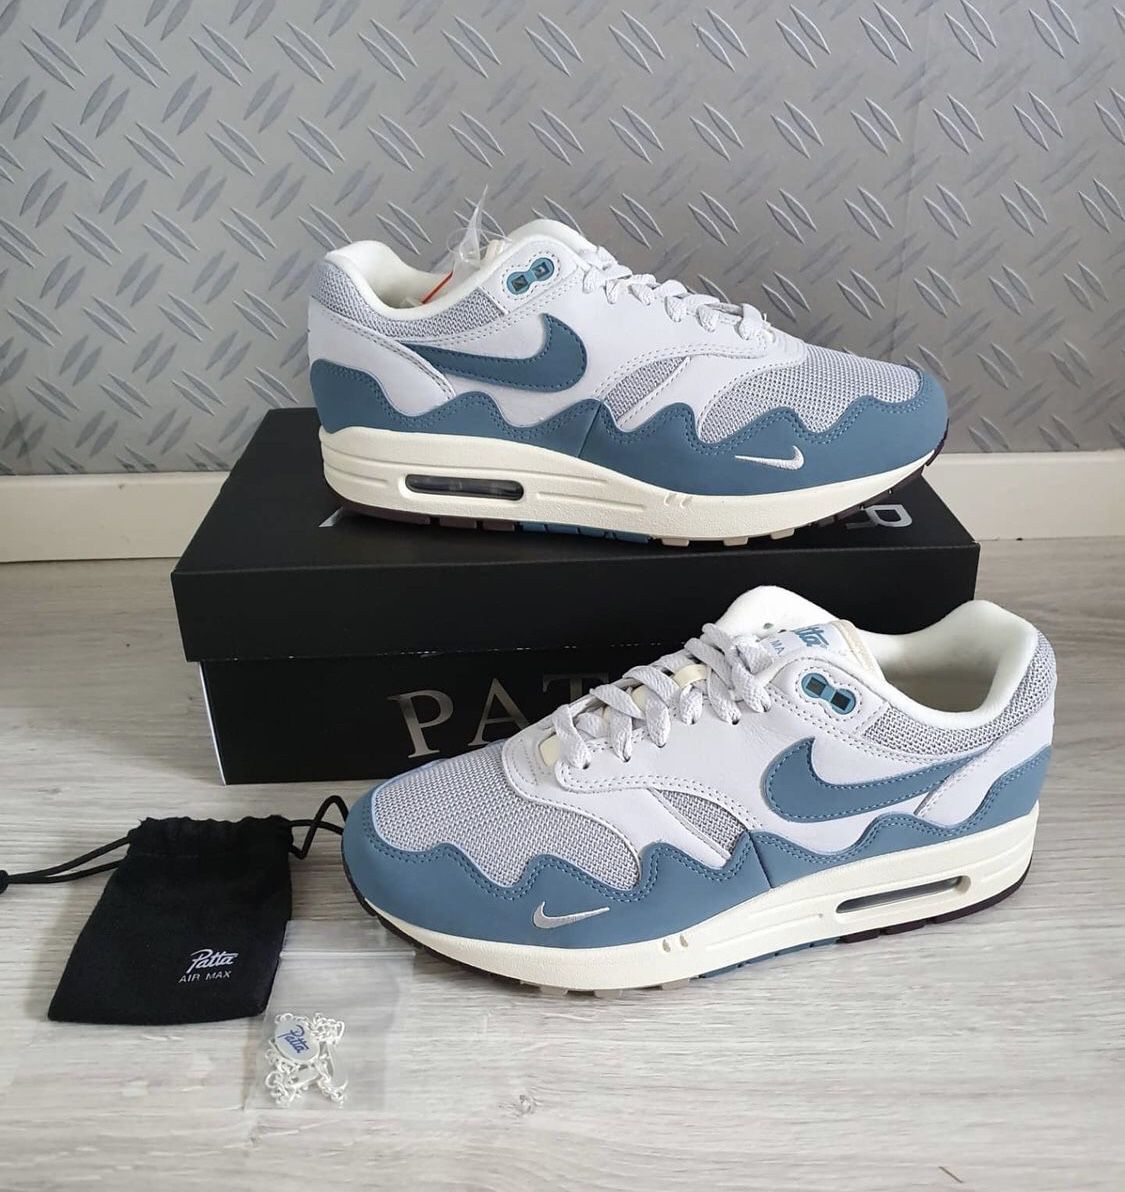 Nike Air Max 1 Patta Waves Noise Aqua with Bracelet - Size 9 NEW DS DEADSTOCK for Sale in Hawthorne, CA - OfferUp